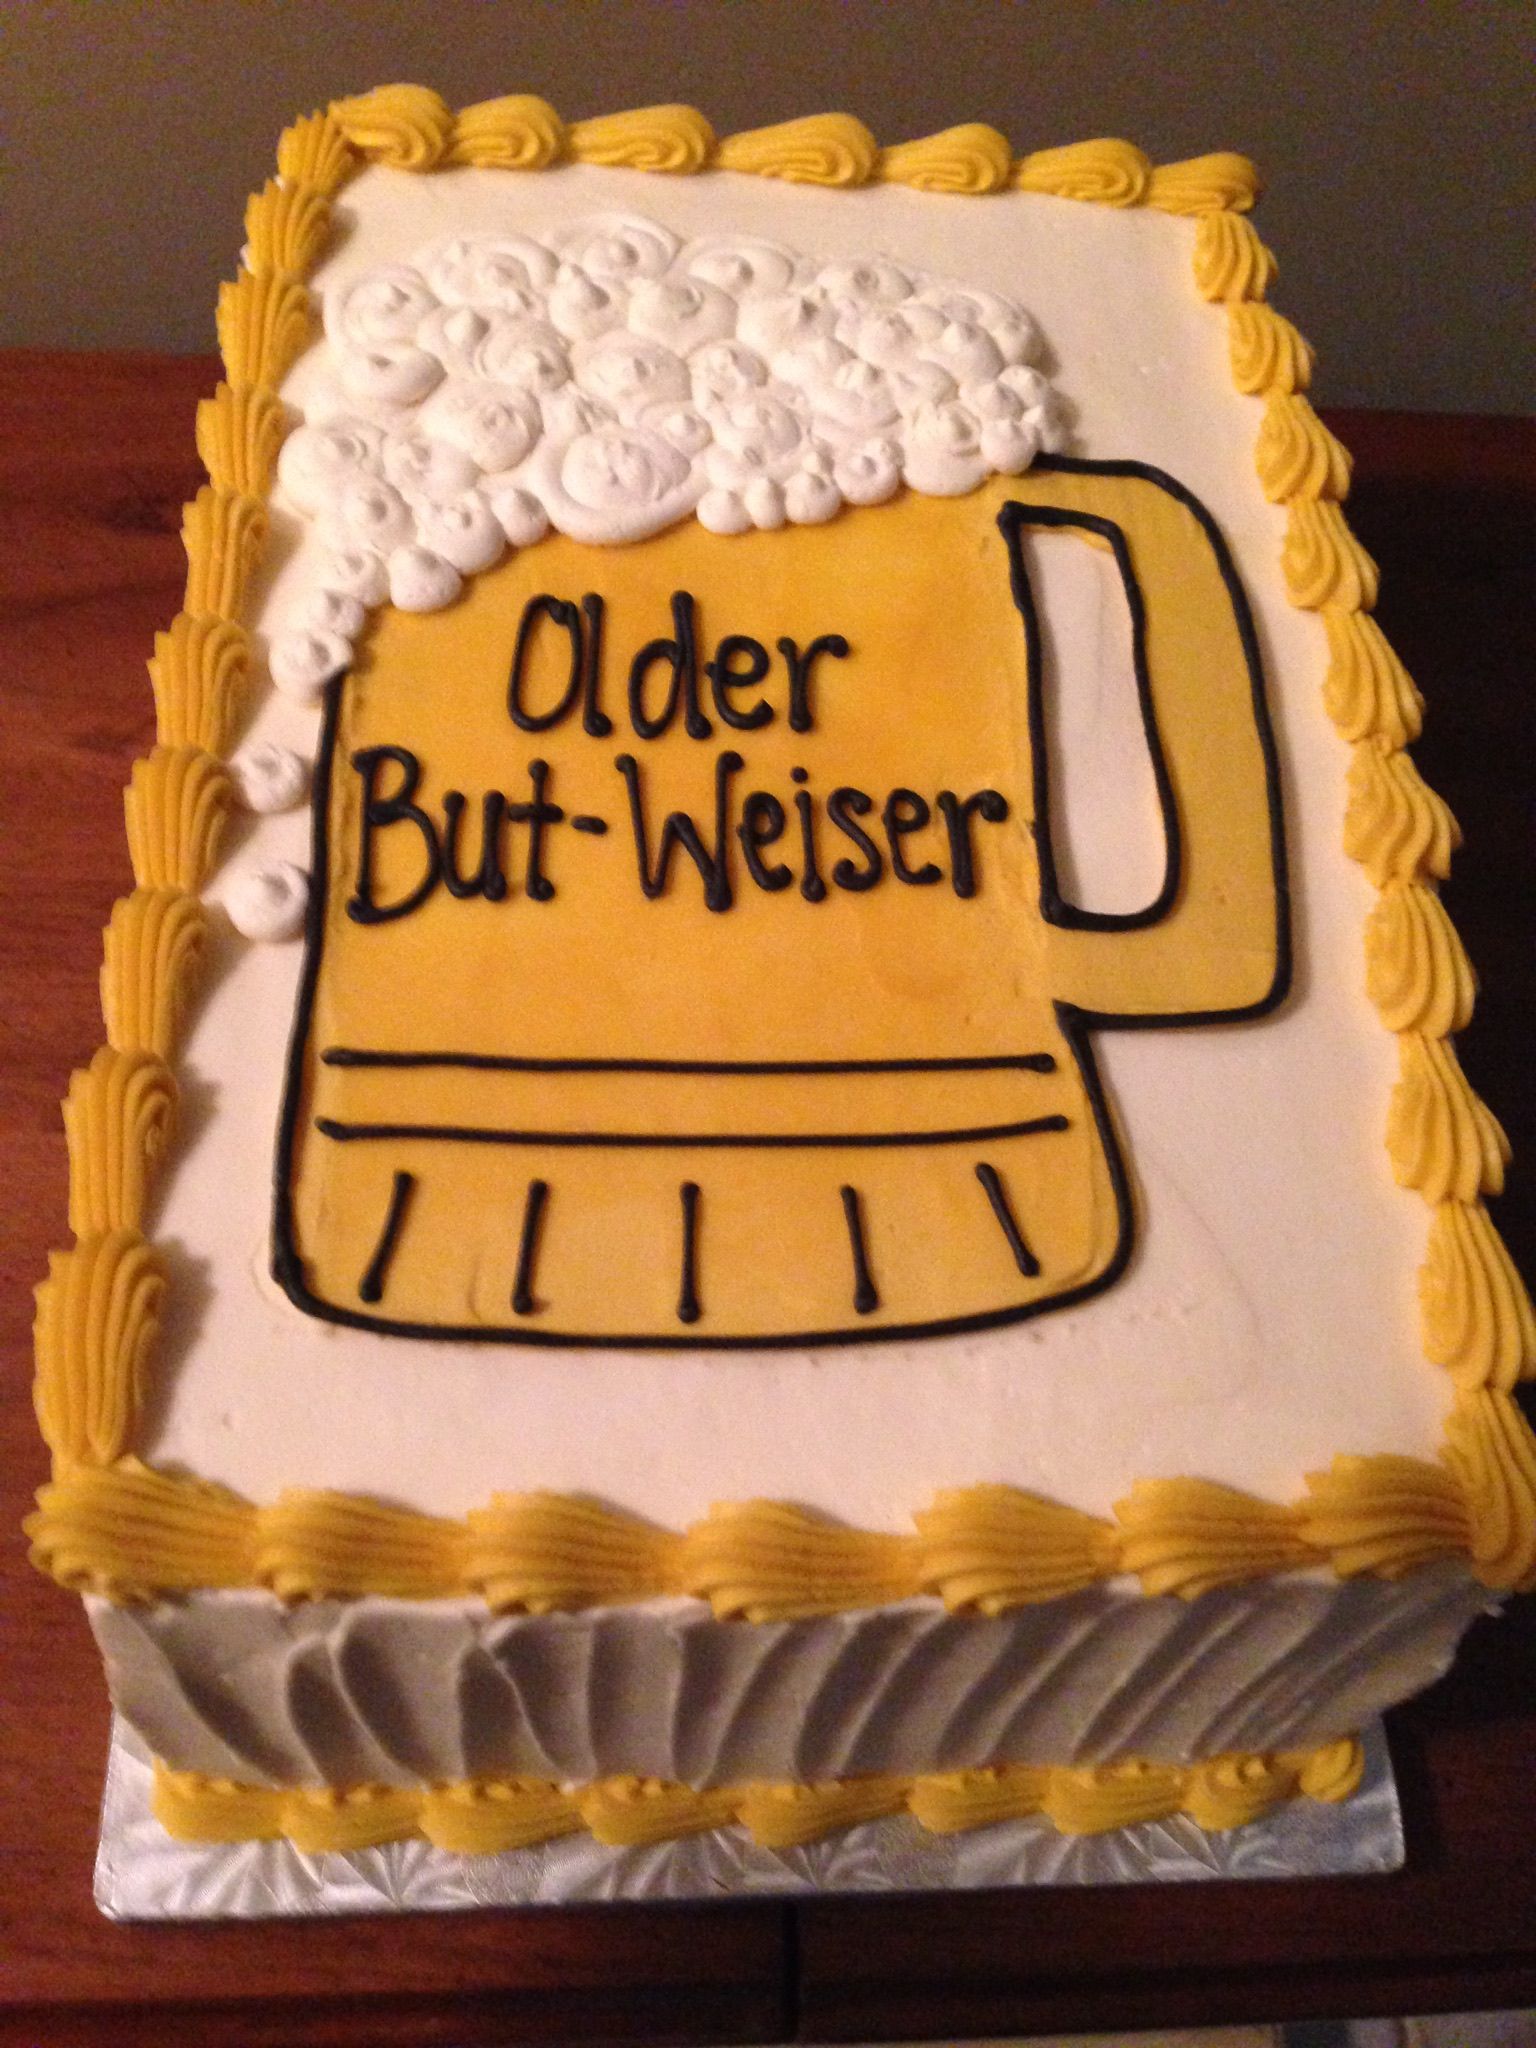 32+ Marvelous Image of Funny Birthday Cakes - entitlementtrap.com | Funny  birthday cakes, Birthday cakes for men, Cool birthday cakes